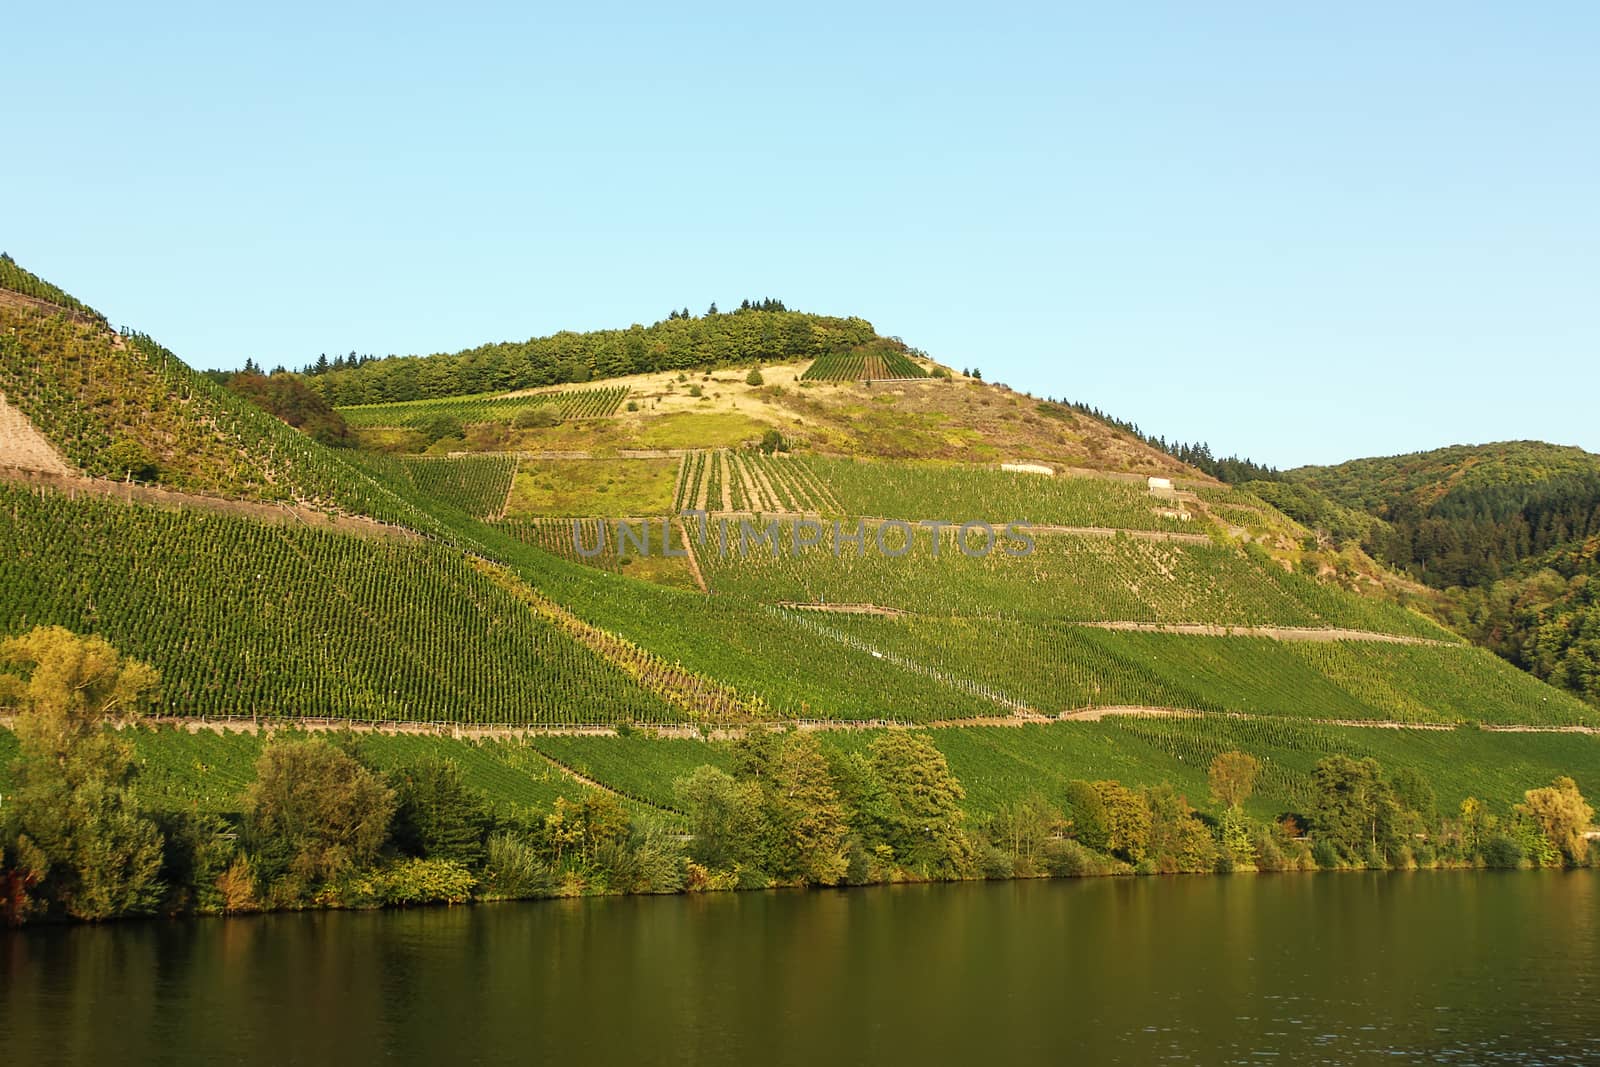 The vineyards along the river Moselle,Germany by borisb17